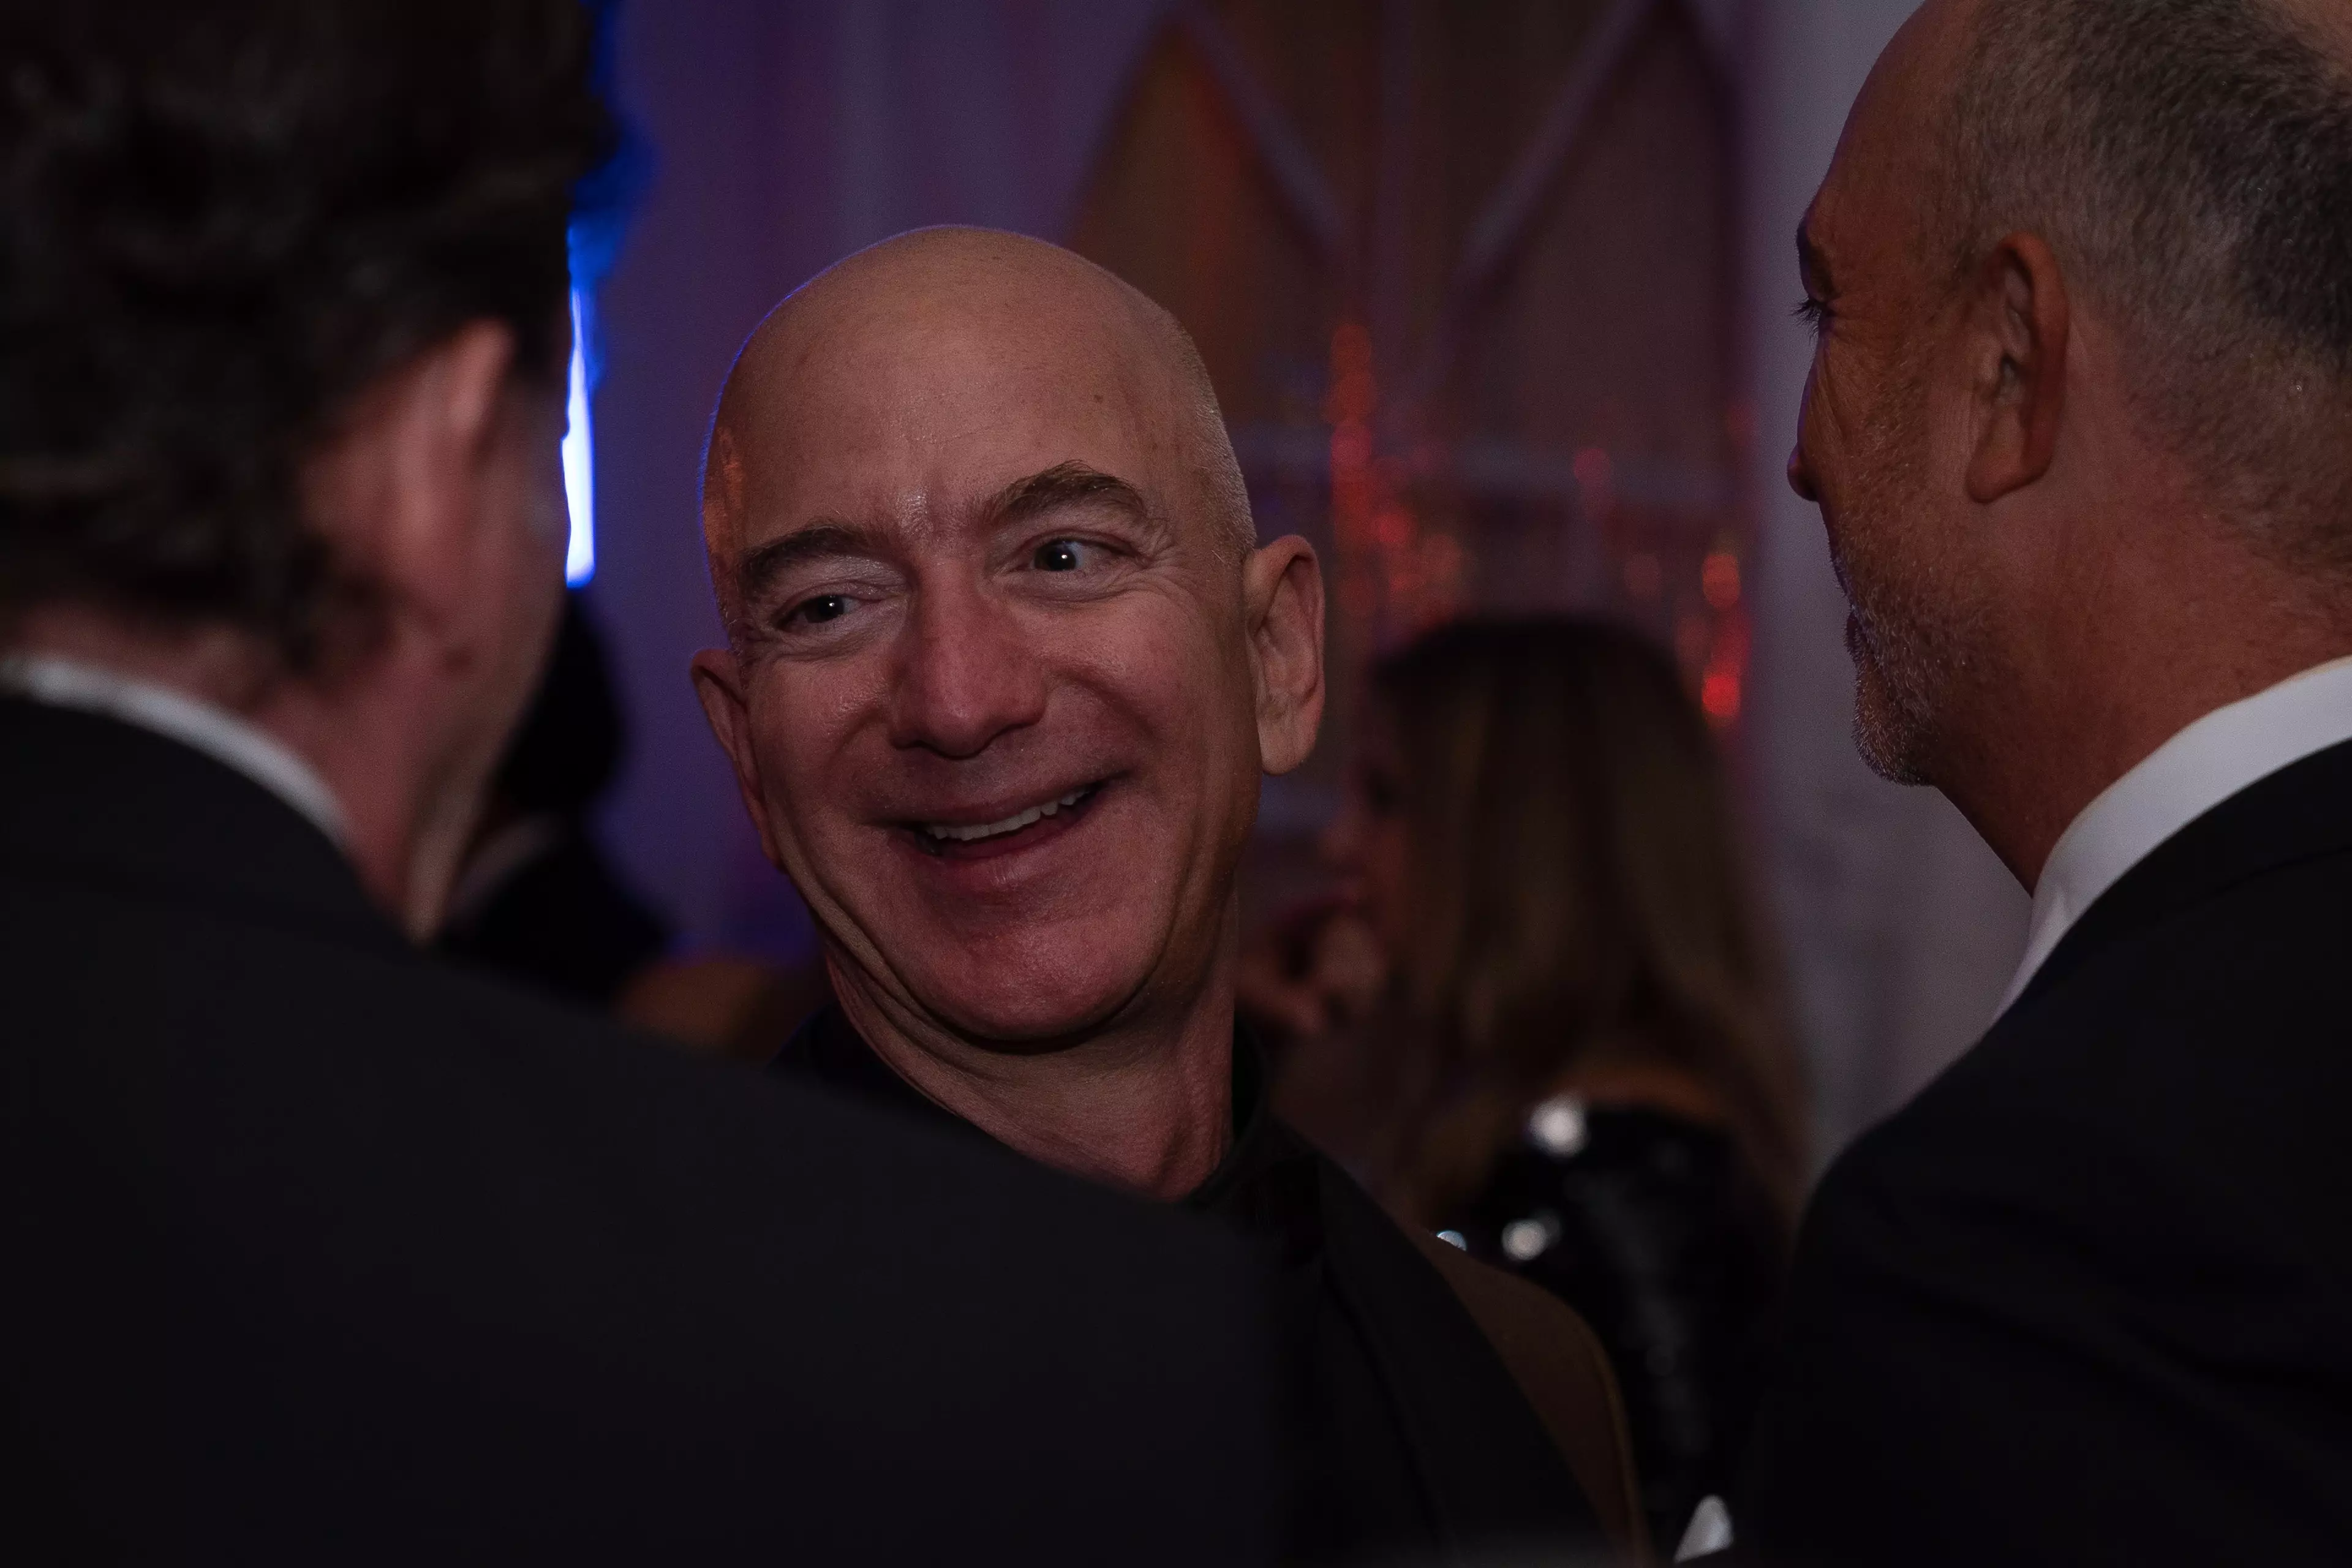 Jeff Bezos, the richest man in the world according to Bloomberg. No wonder he's smiling.